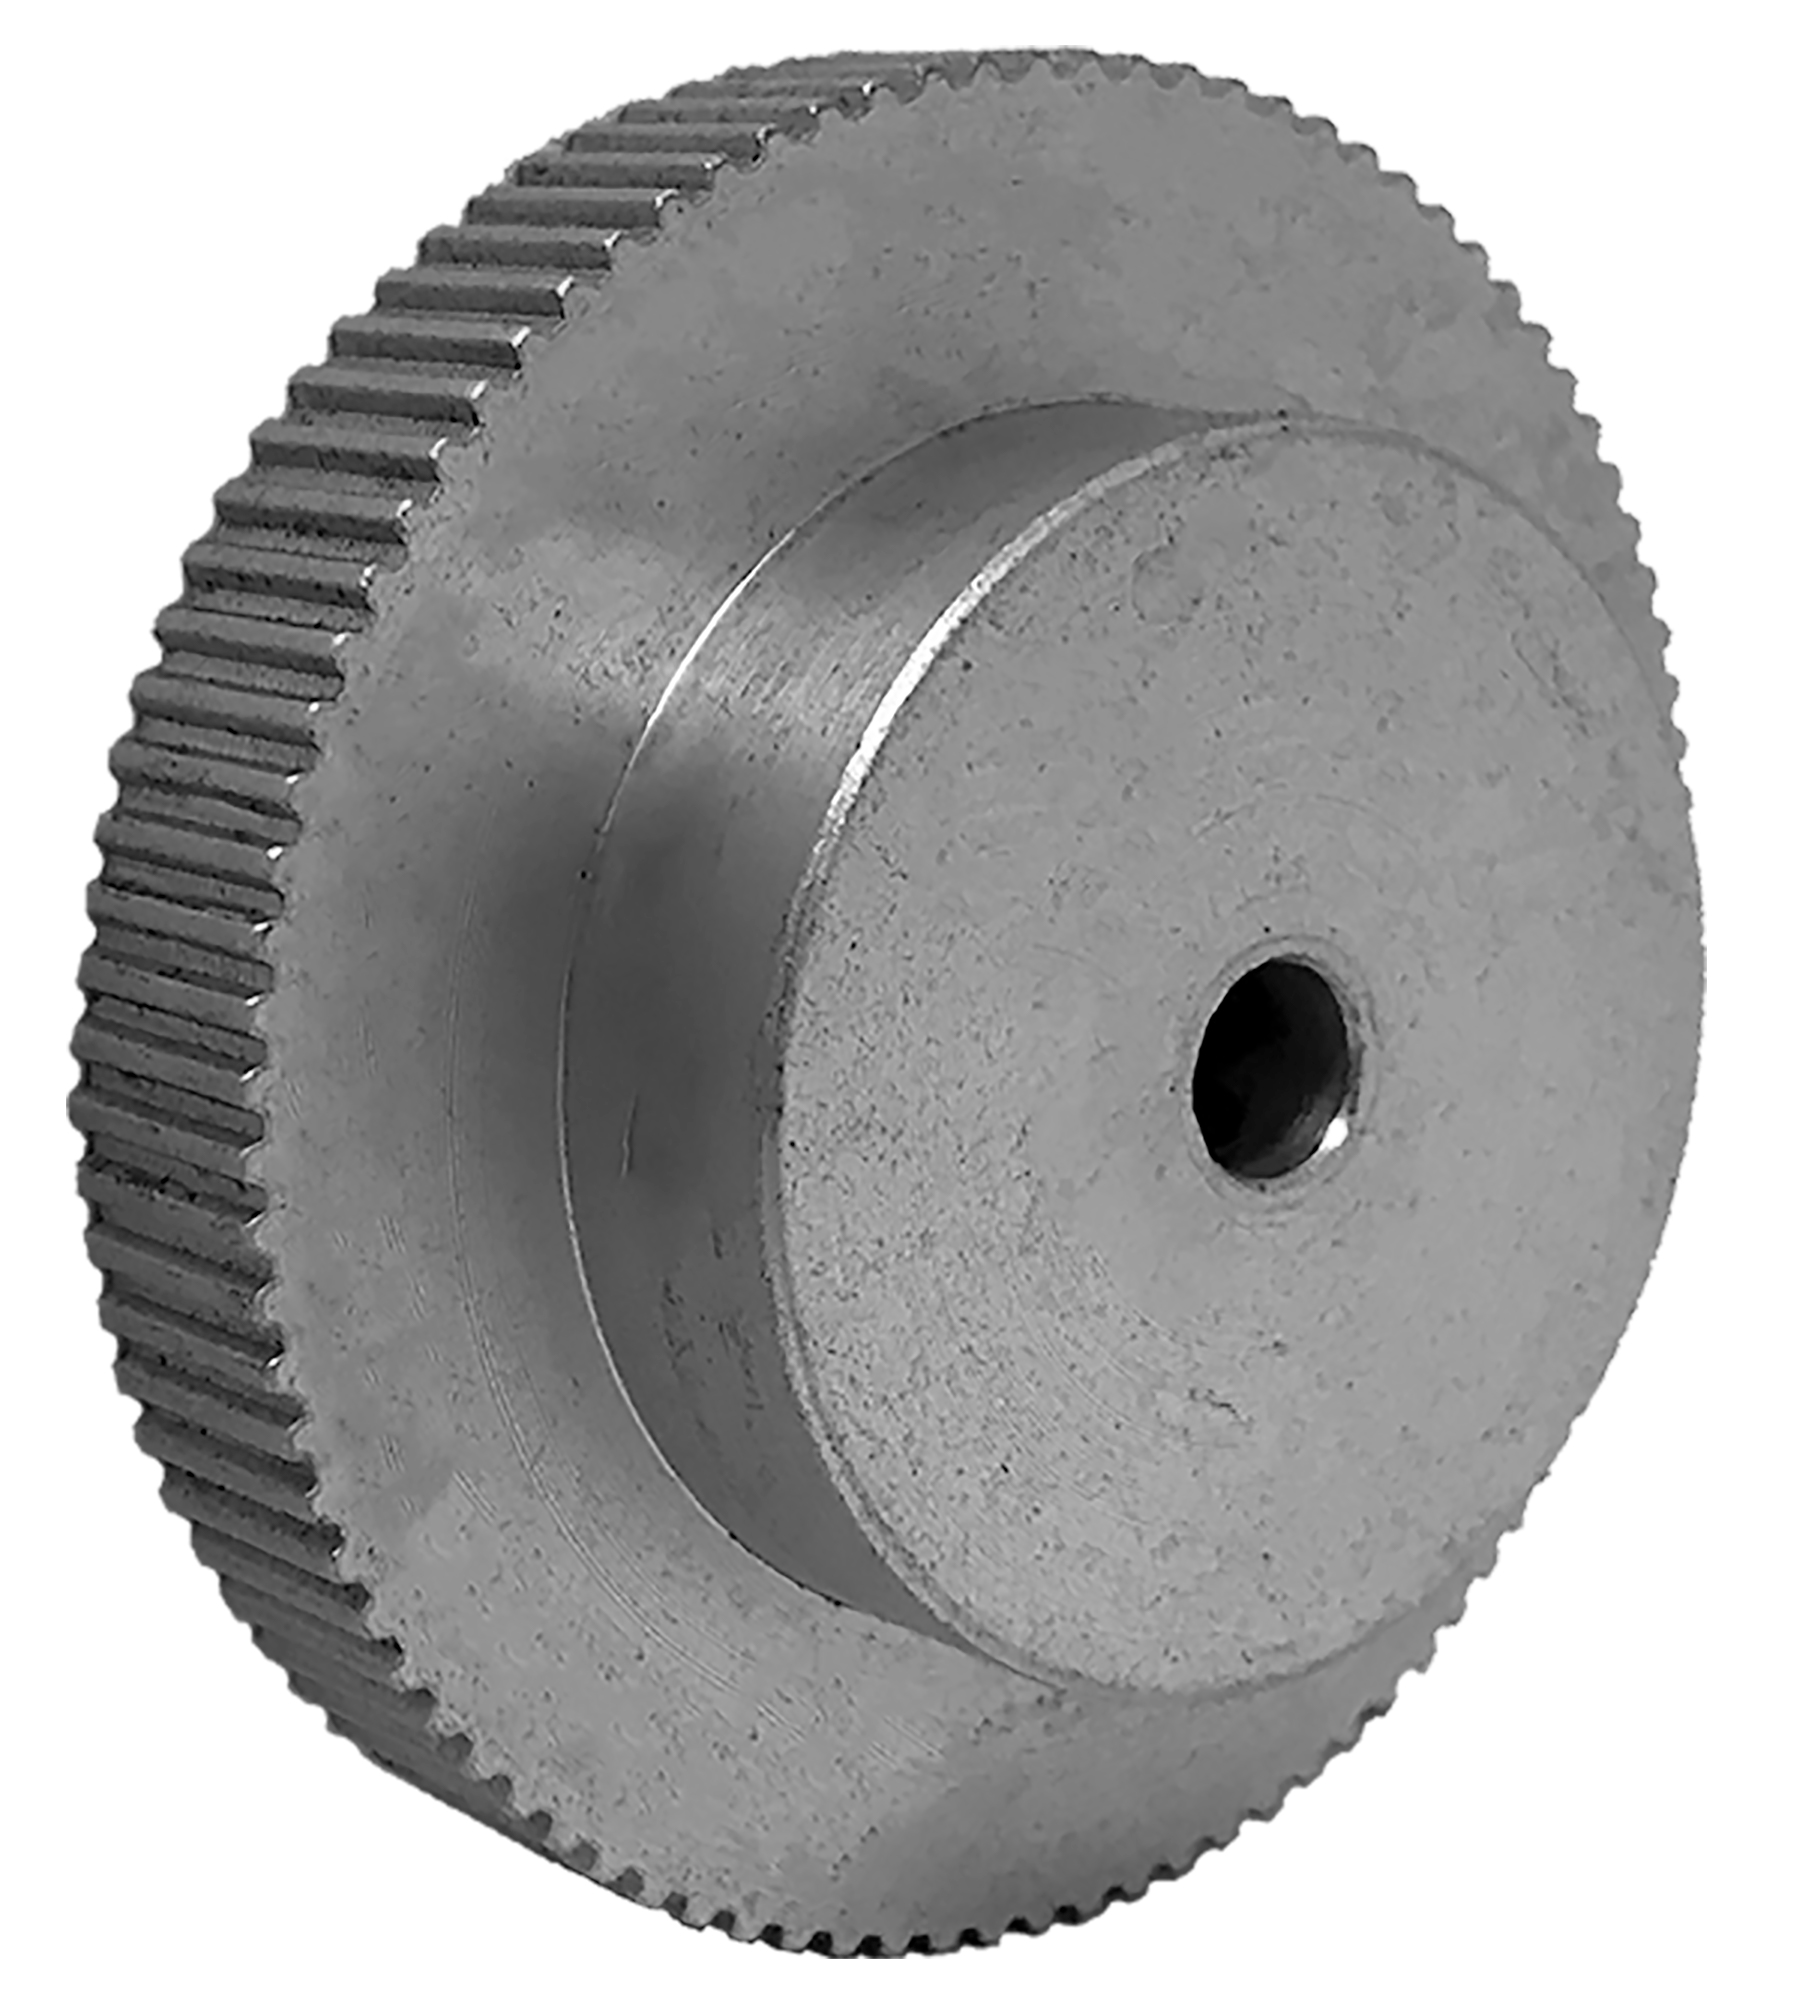 90LT187-6A5 - Aluminum Imperial Pitch Pulleys